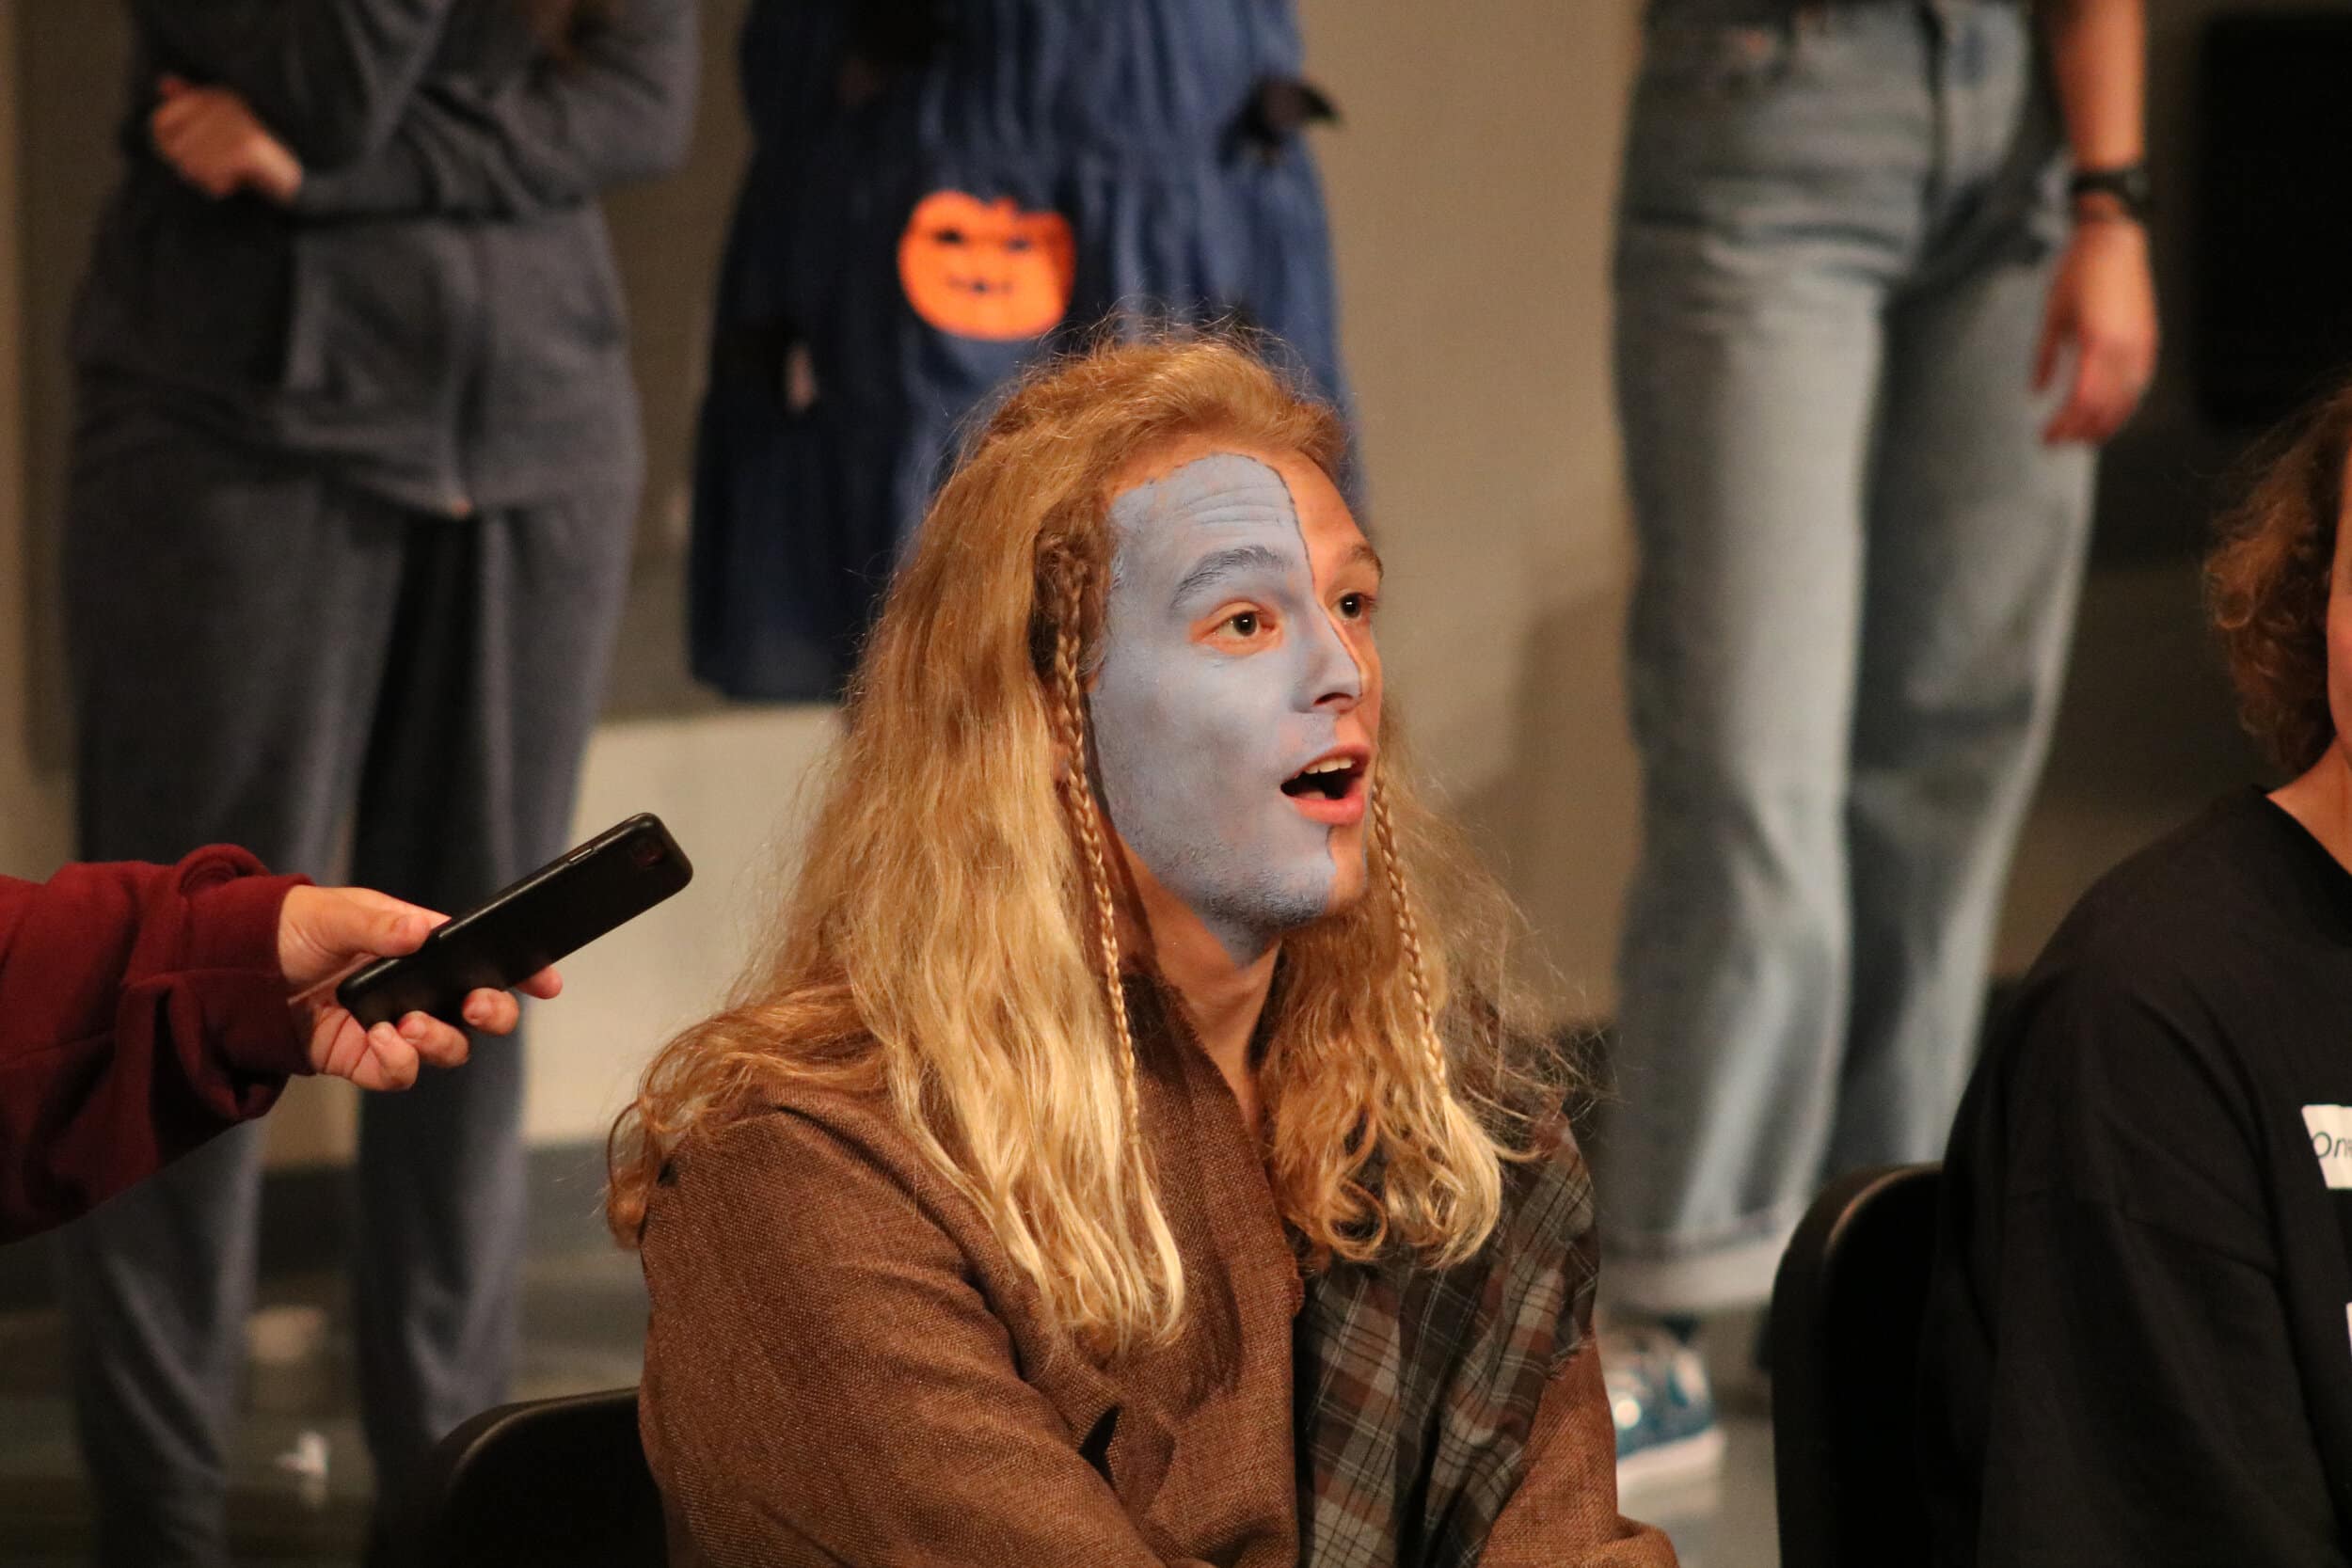 Kittredge, dressed as William Wallace from Braveheart, reacts to his role given to him by an audience member.